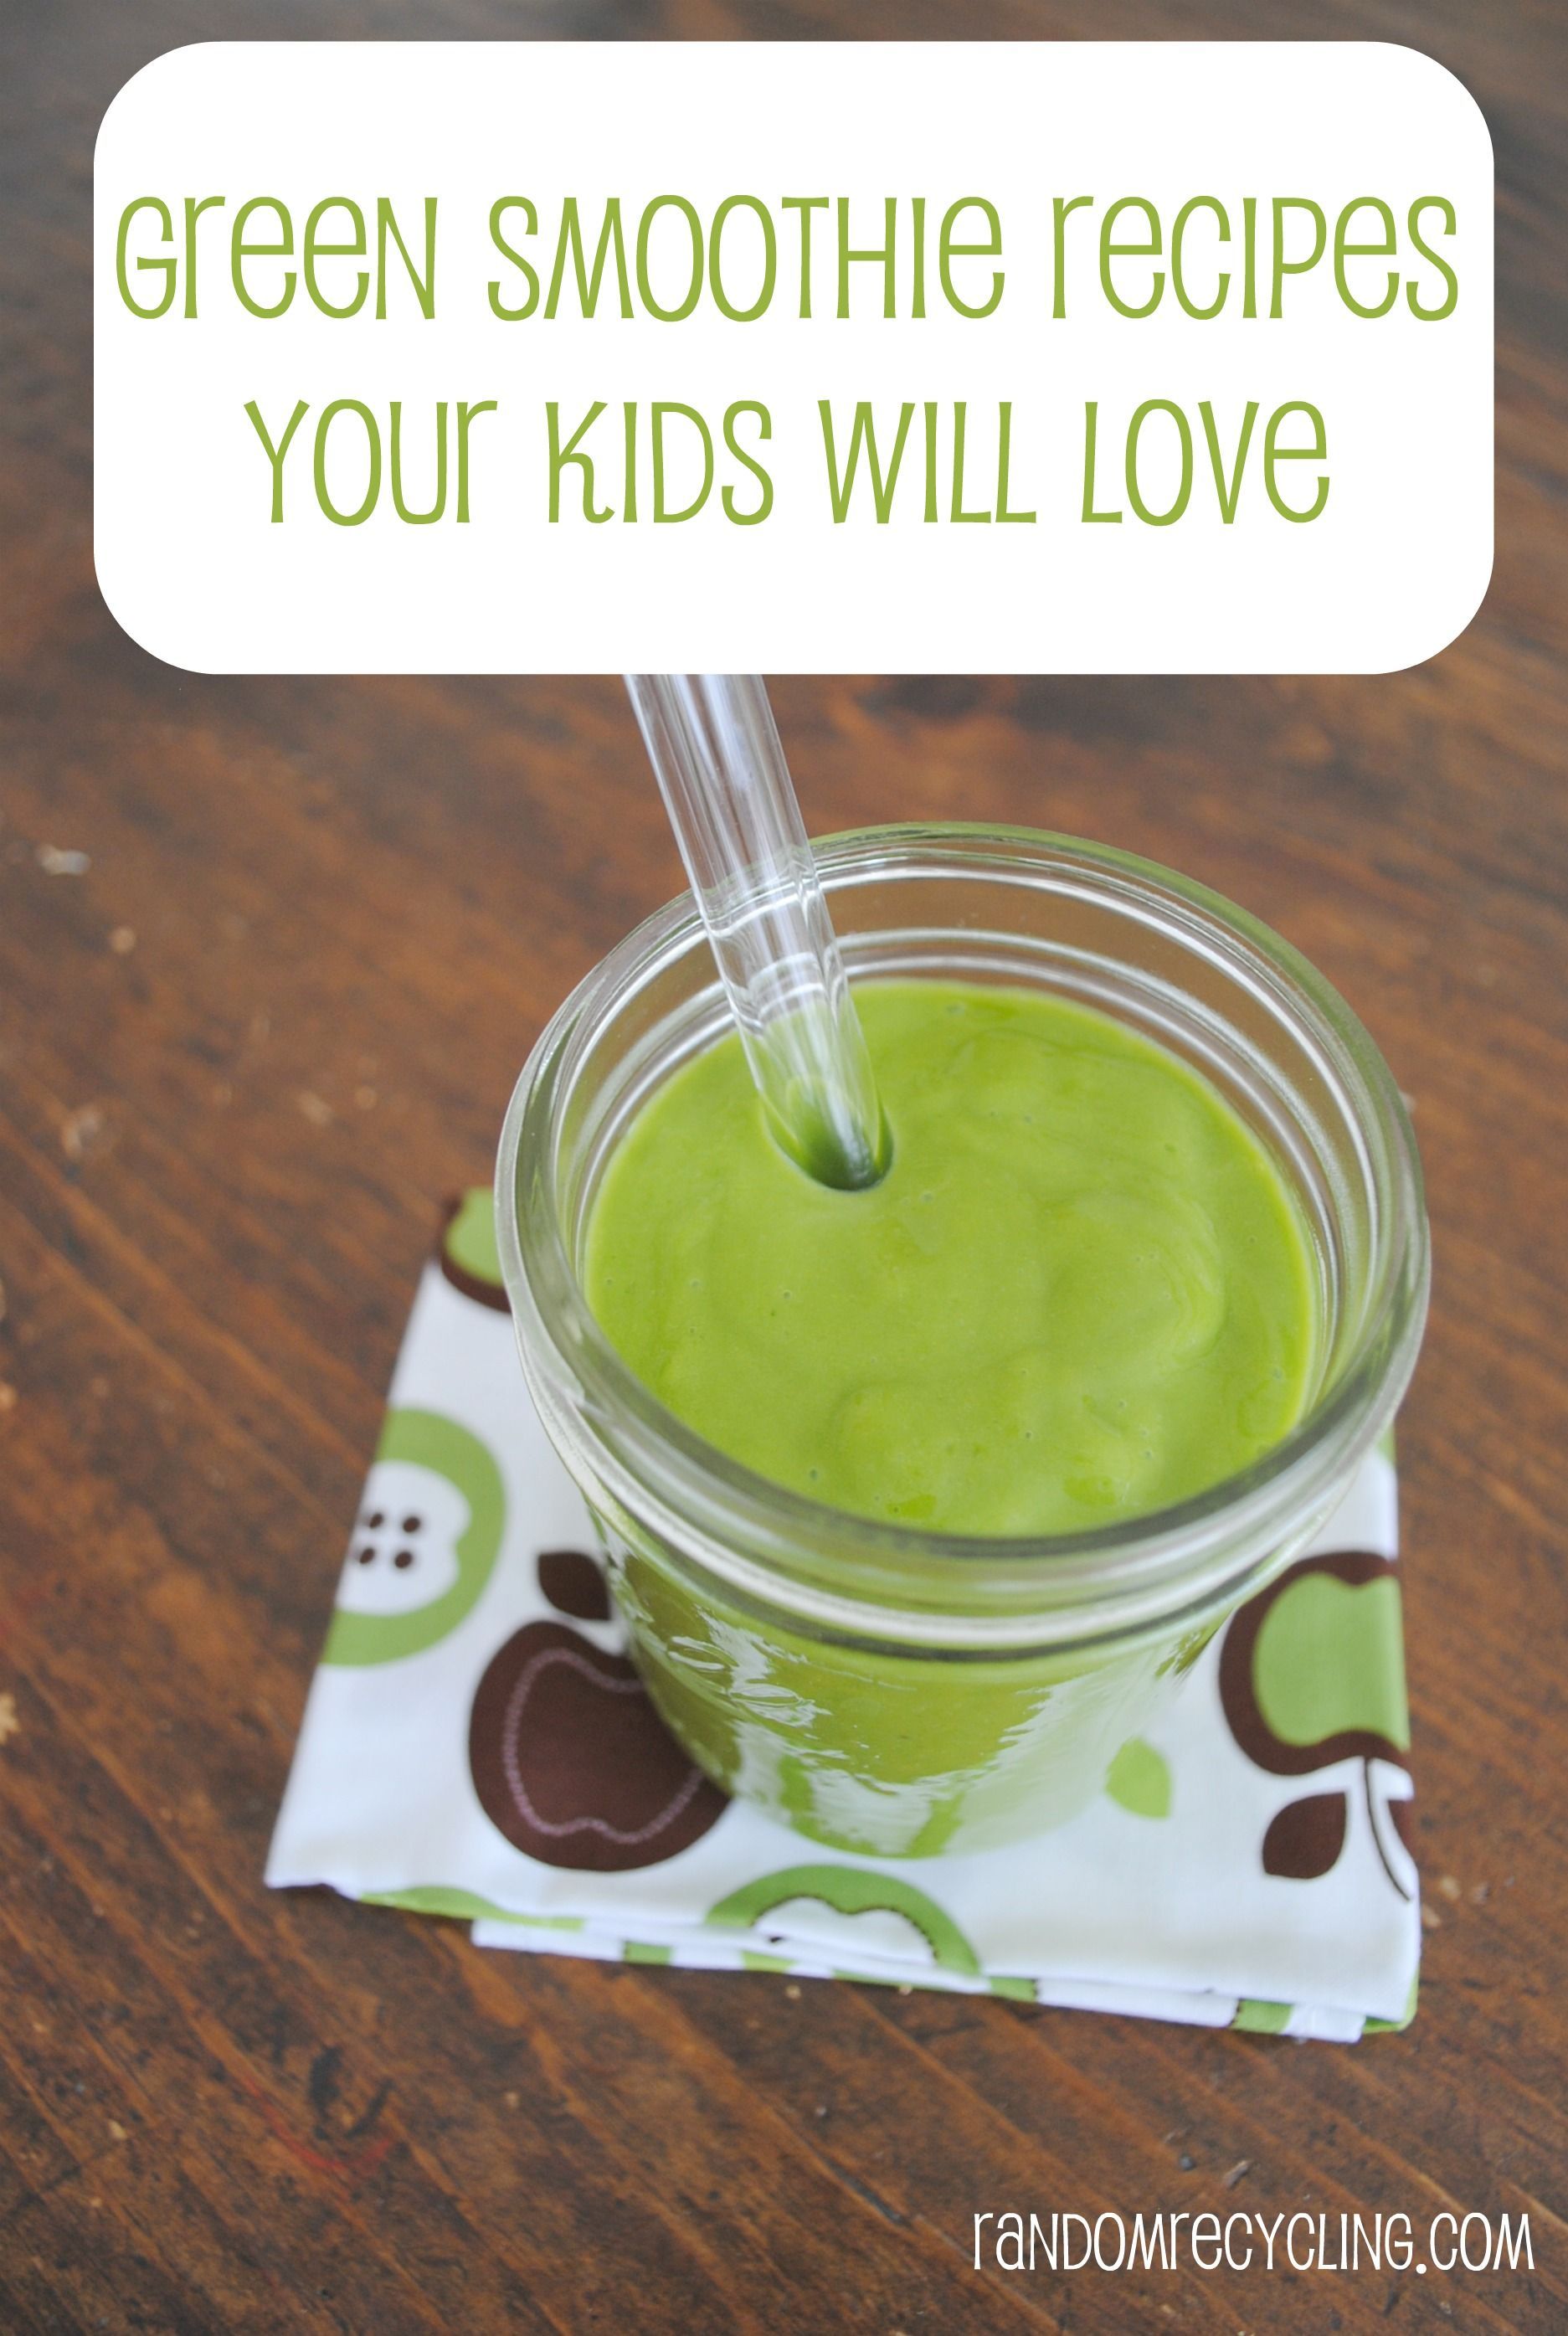 My kids favorite snack lately is a smoothie. My two year old runs into the kitchen and keeps saying “moothie” until I make him one. Smoothies are a great way to sneak additional vegetables